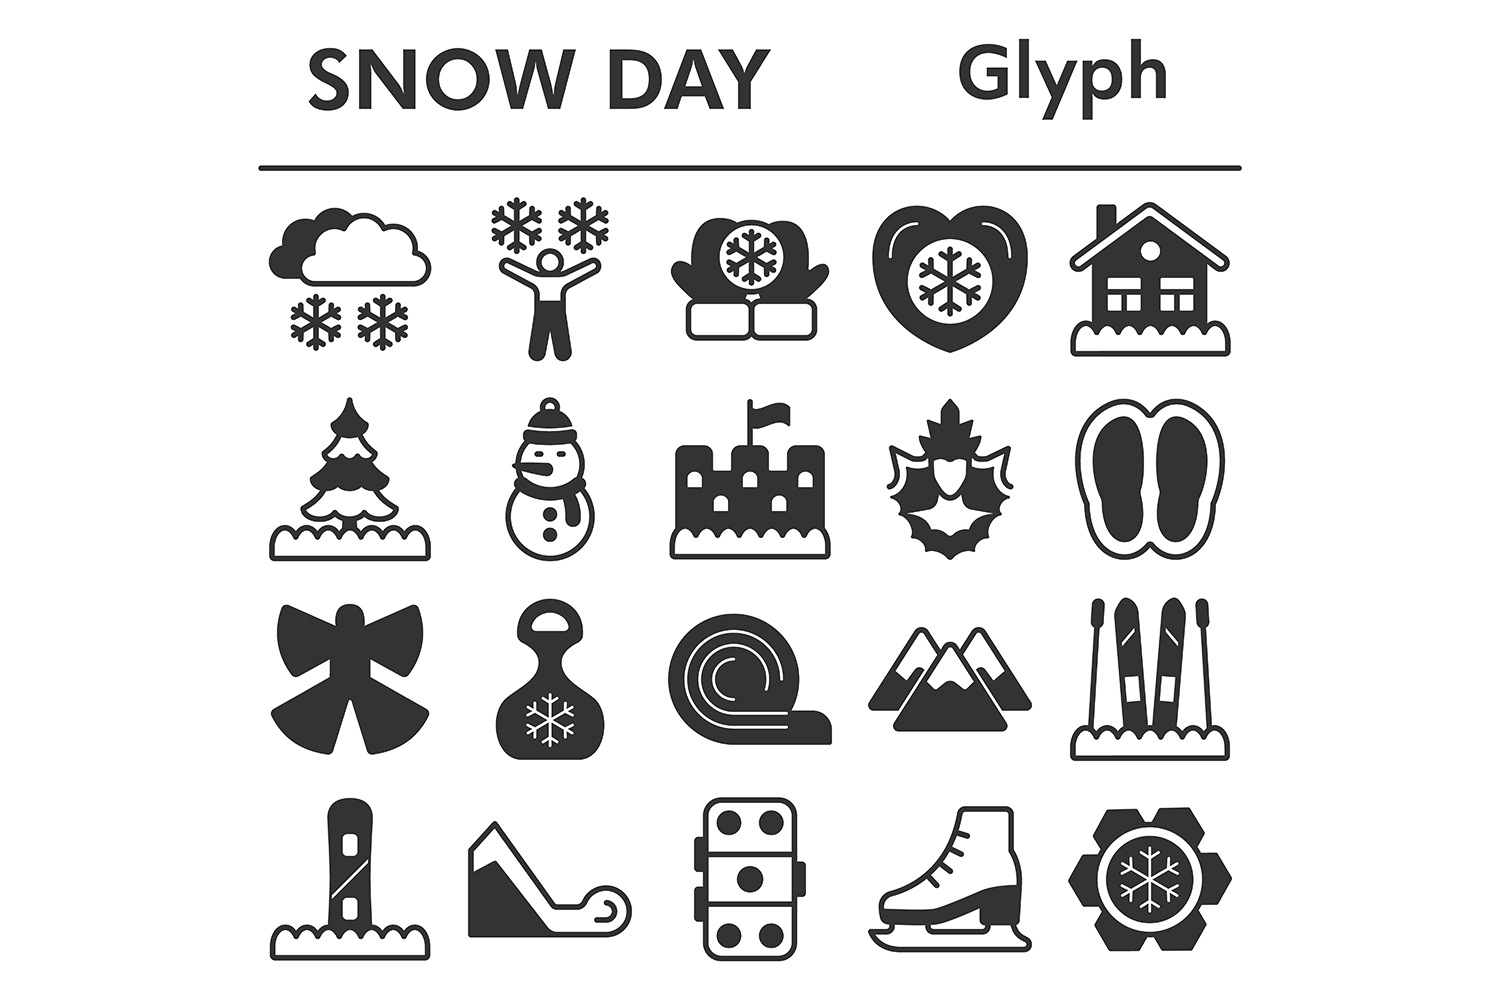 Snow day icons set, glyph style pinterest preview image.